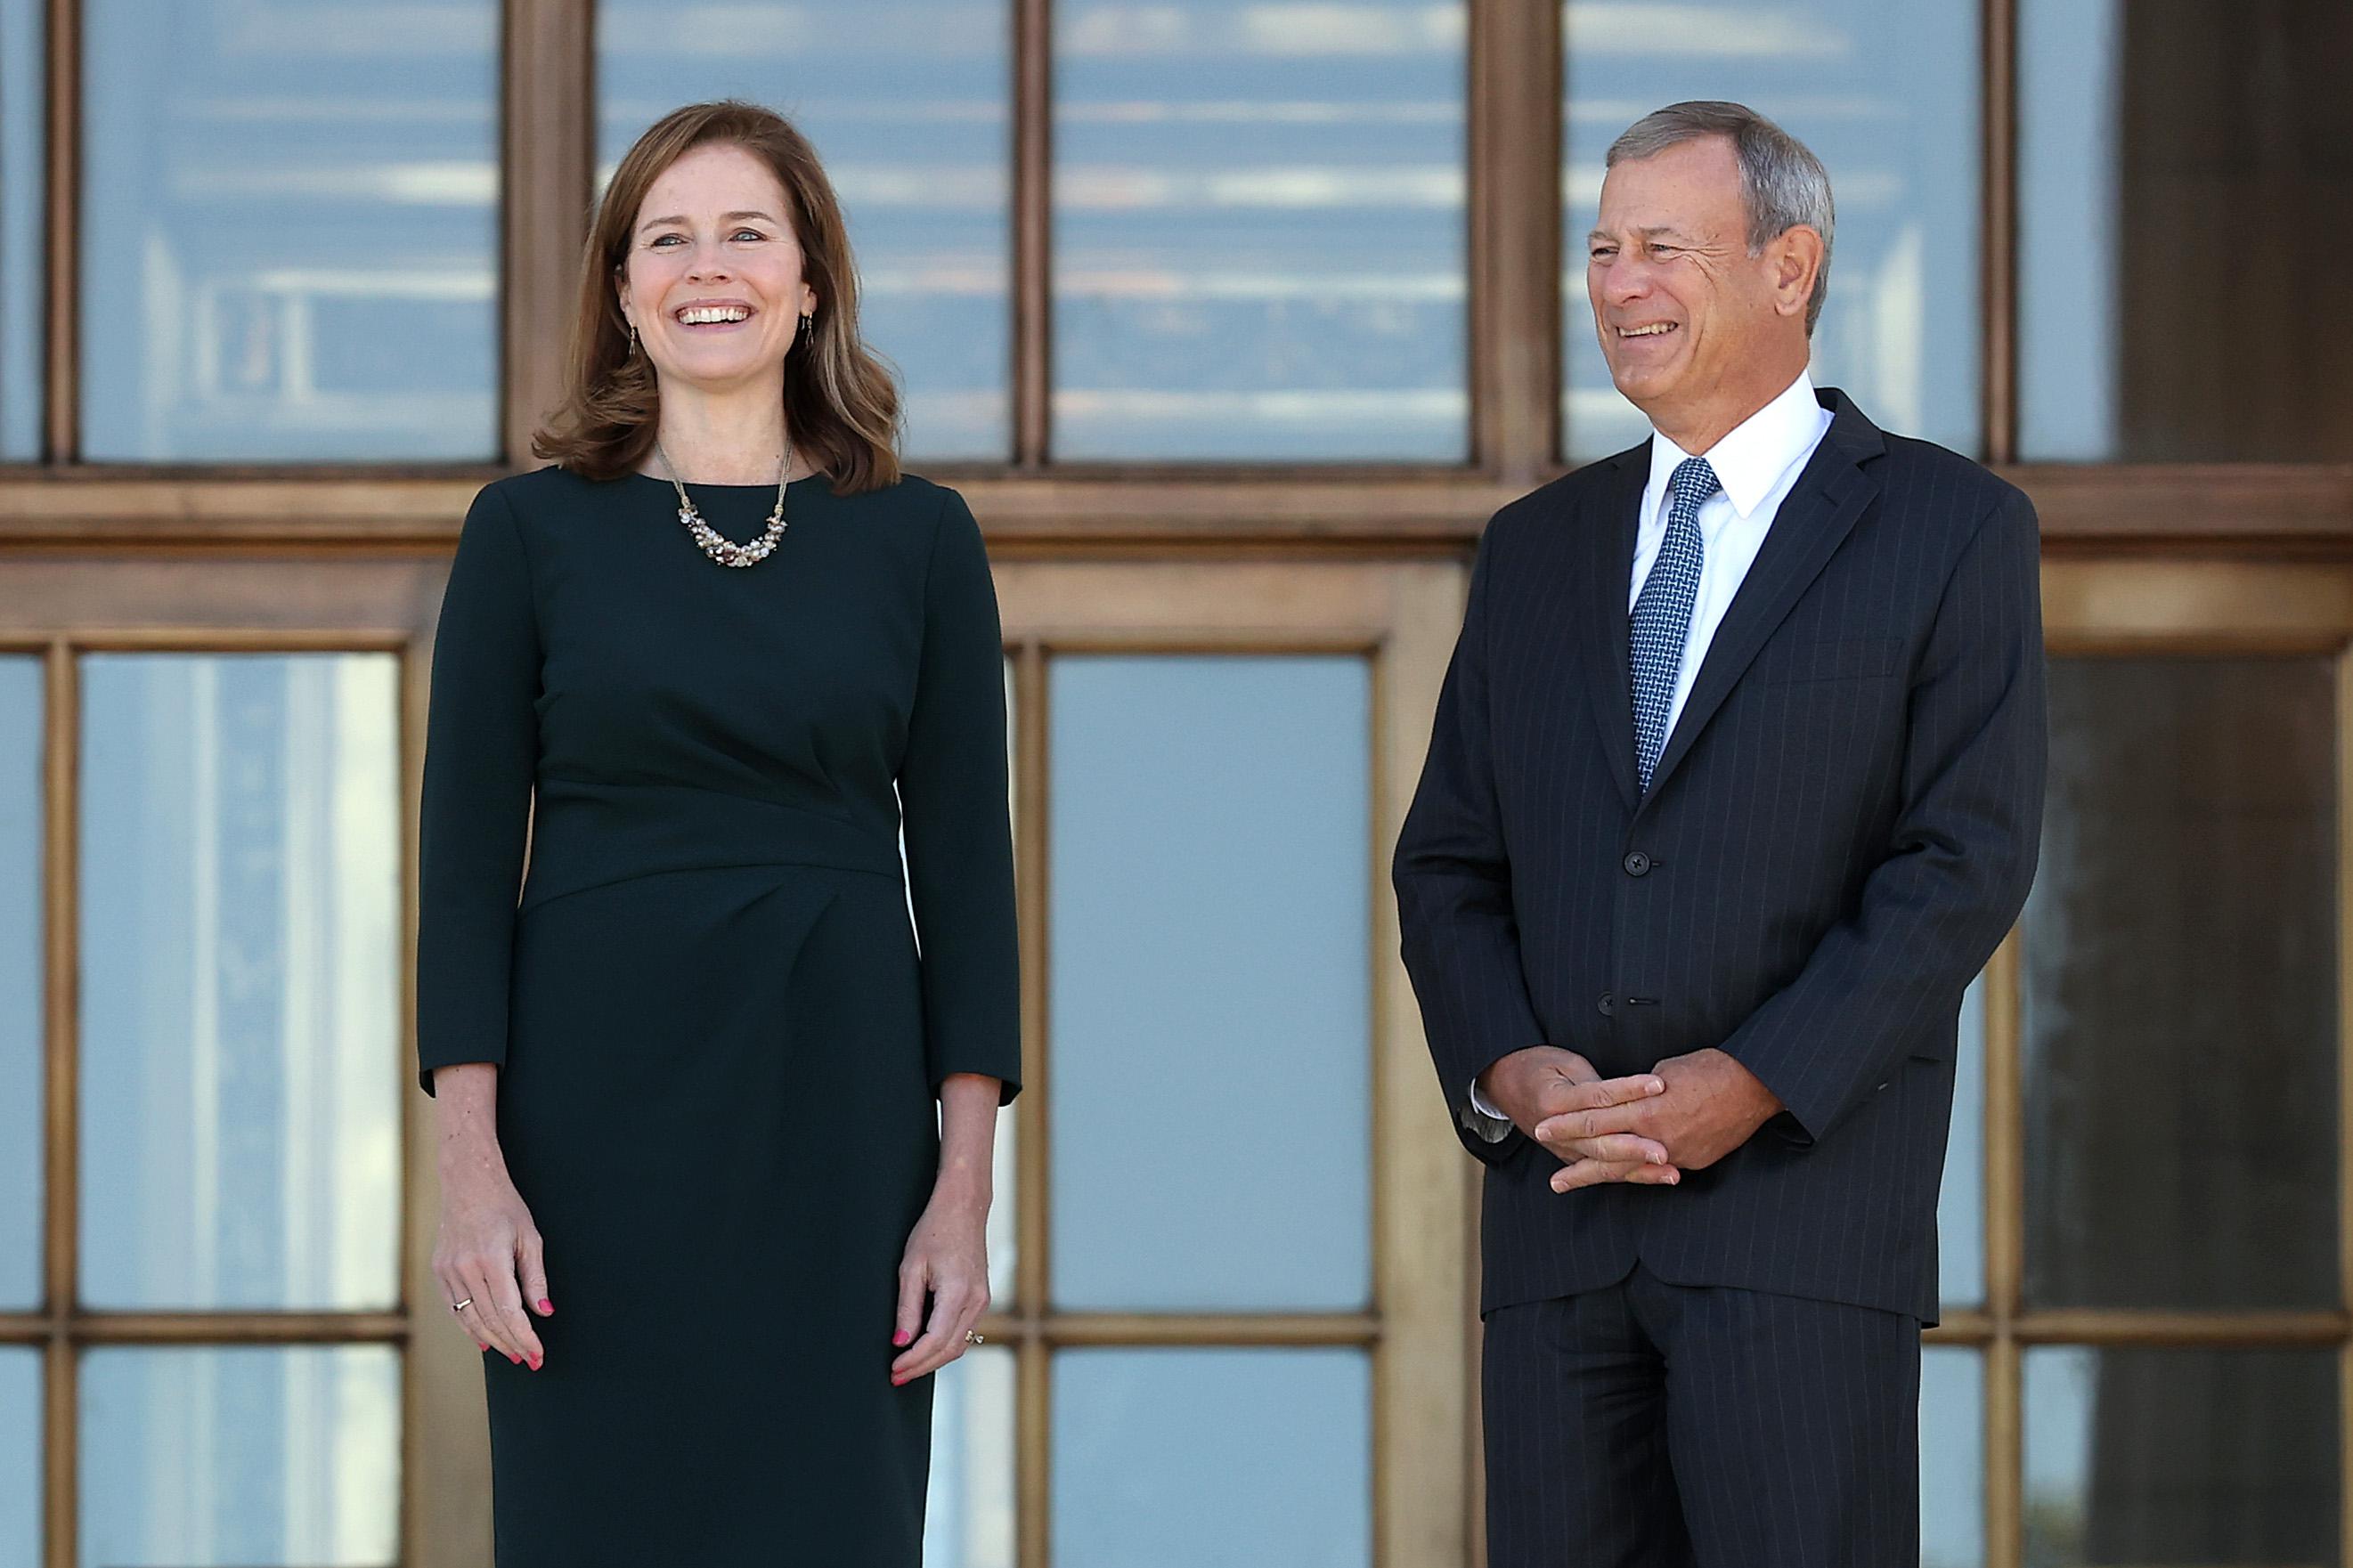 Amy Coney Barrett and John Roberts stand outside and smile.